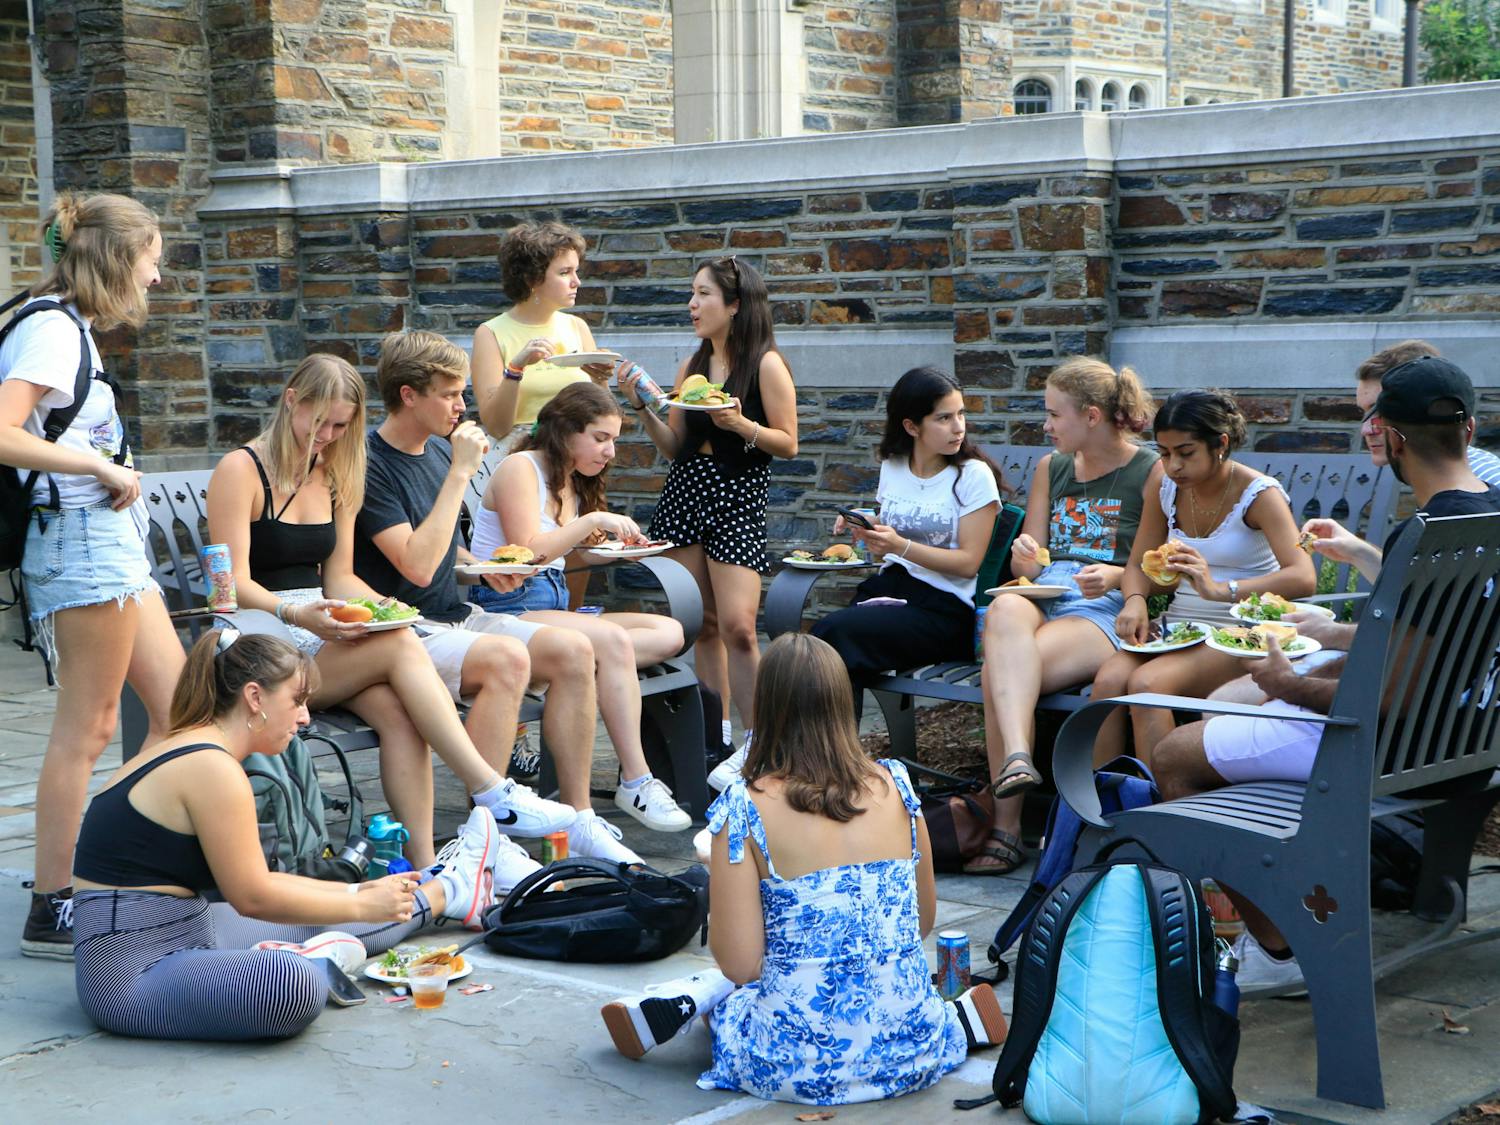 Senior Class Council hosted an FDOC event on Aug. 29, providing free beer and wine to seniors who are older than 21 years old, thanks to Duke's new alcohol policies.